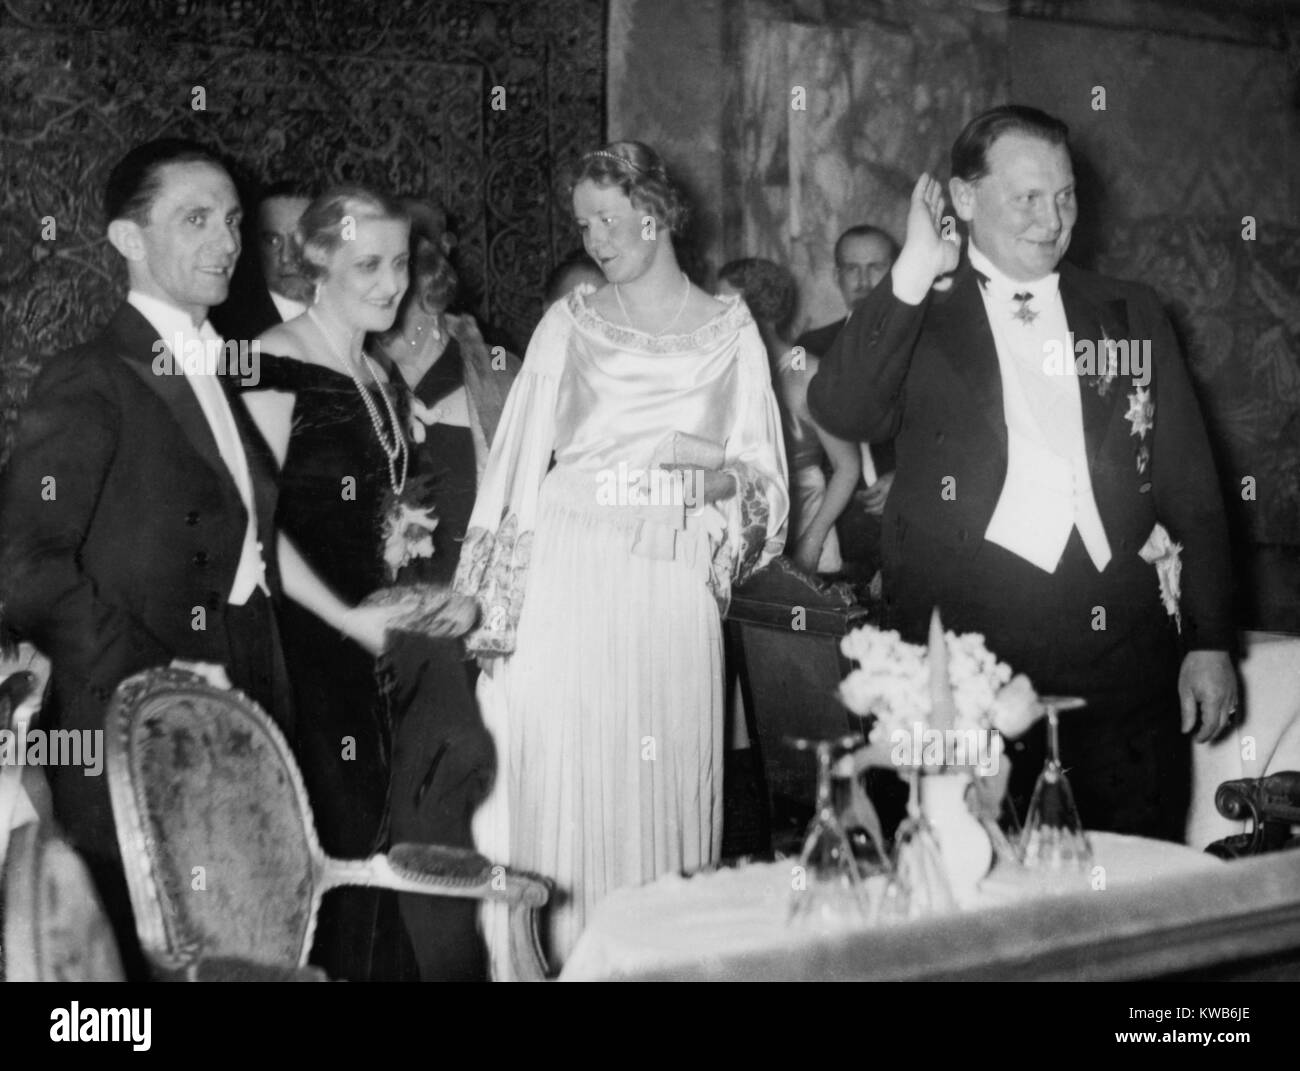 Joseph and Magda Goebbels with Emmy and Hermann Goering at the Press Ball. As wives of the second and third most important German Nazis', they often appeared at official functions. Berlin, Germany, 1939. (BSLOC_2014_8_175) Stock Photo